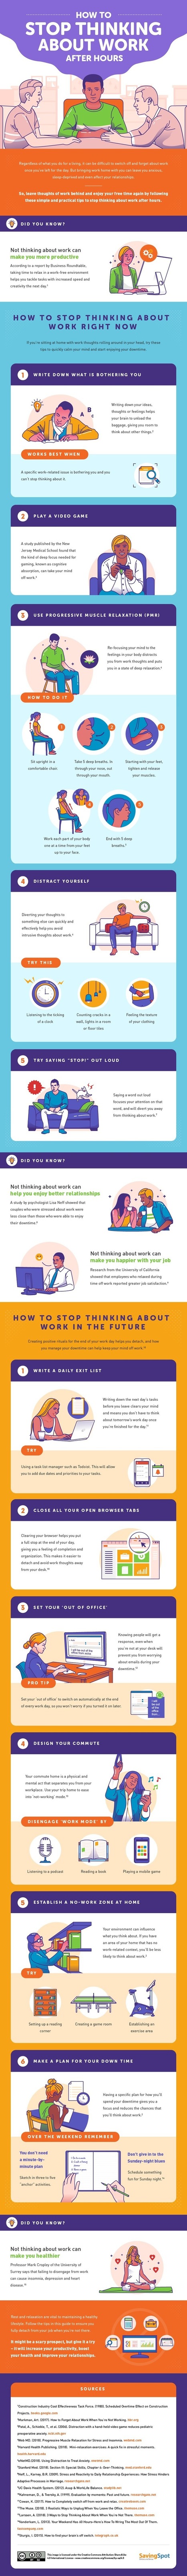 How to switch off your work brain after hours (infographic) via @digitaliworld | Education 2.0 & 3.0 | Scoop.it